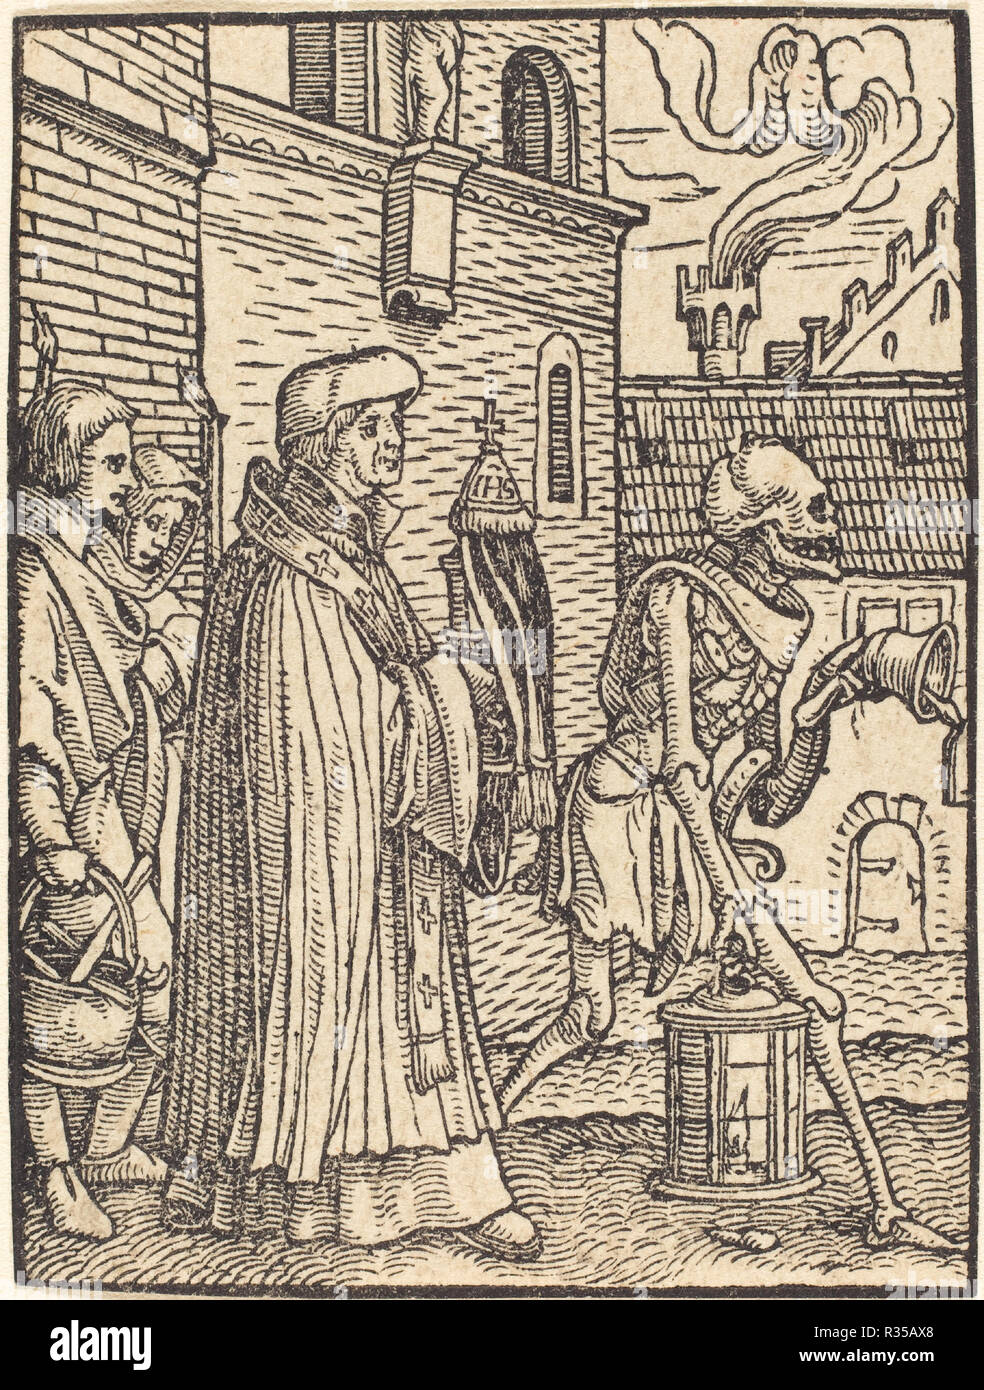 Parish Priest. Medium: woodcut. Museum: National Gallery of Art, Washington DC. Author: Hans Holbein the Younger. Stock Photo